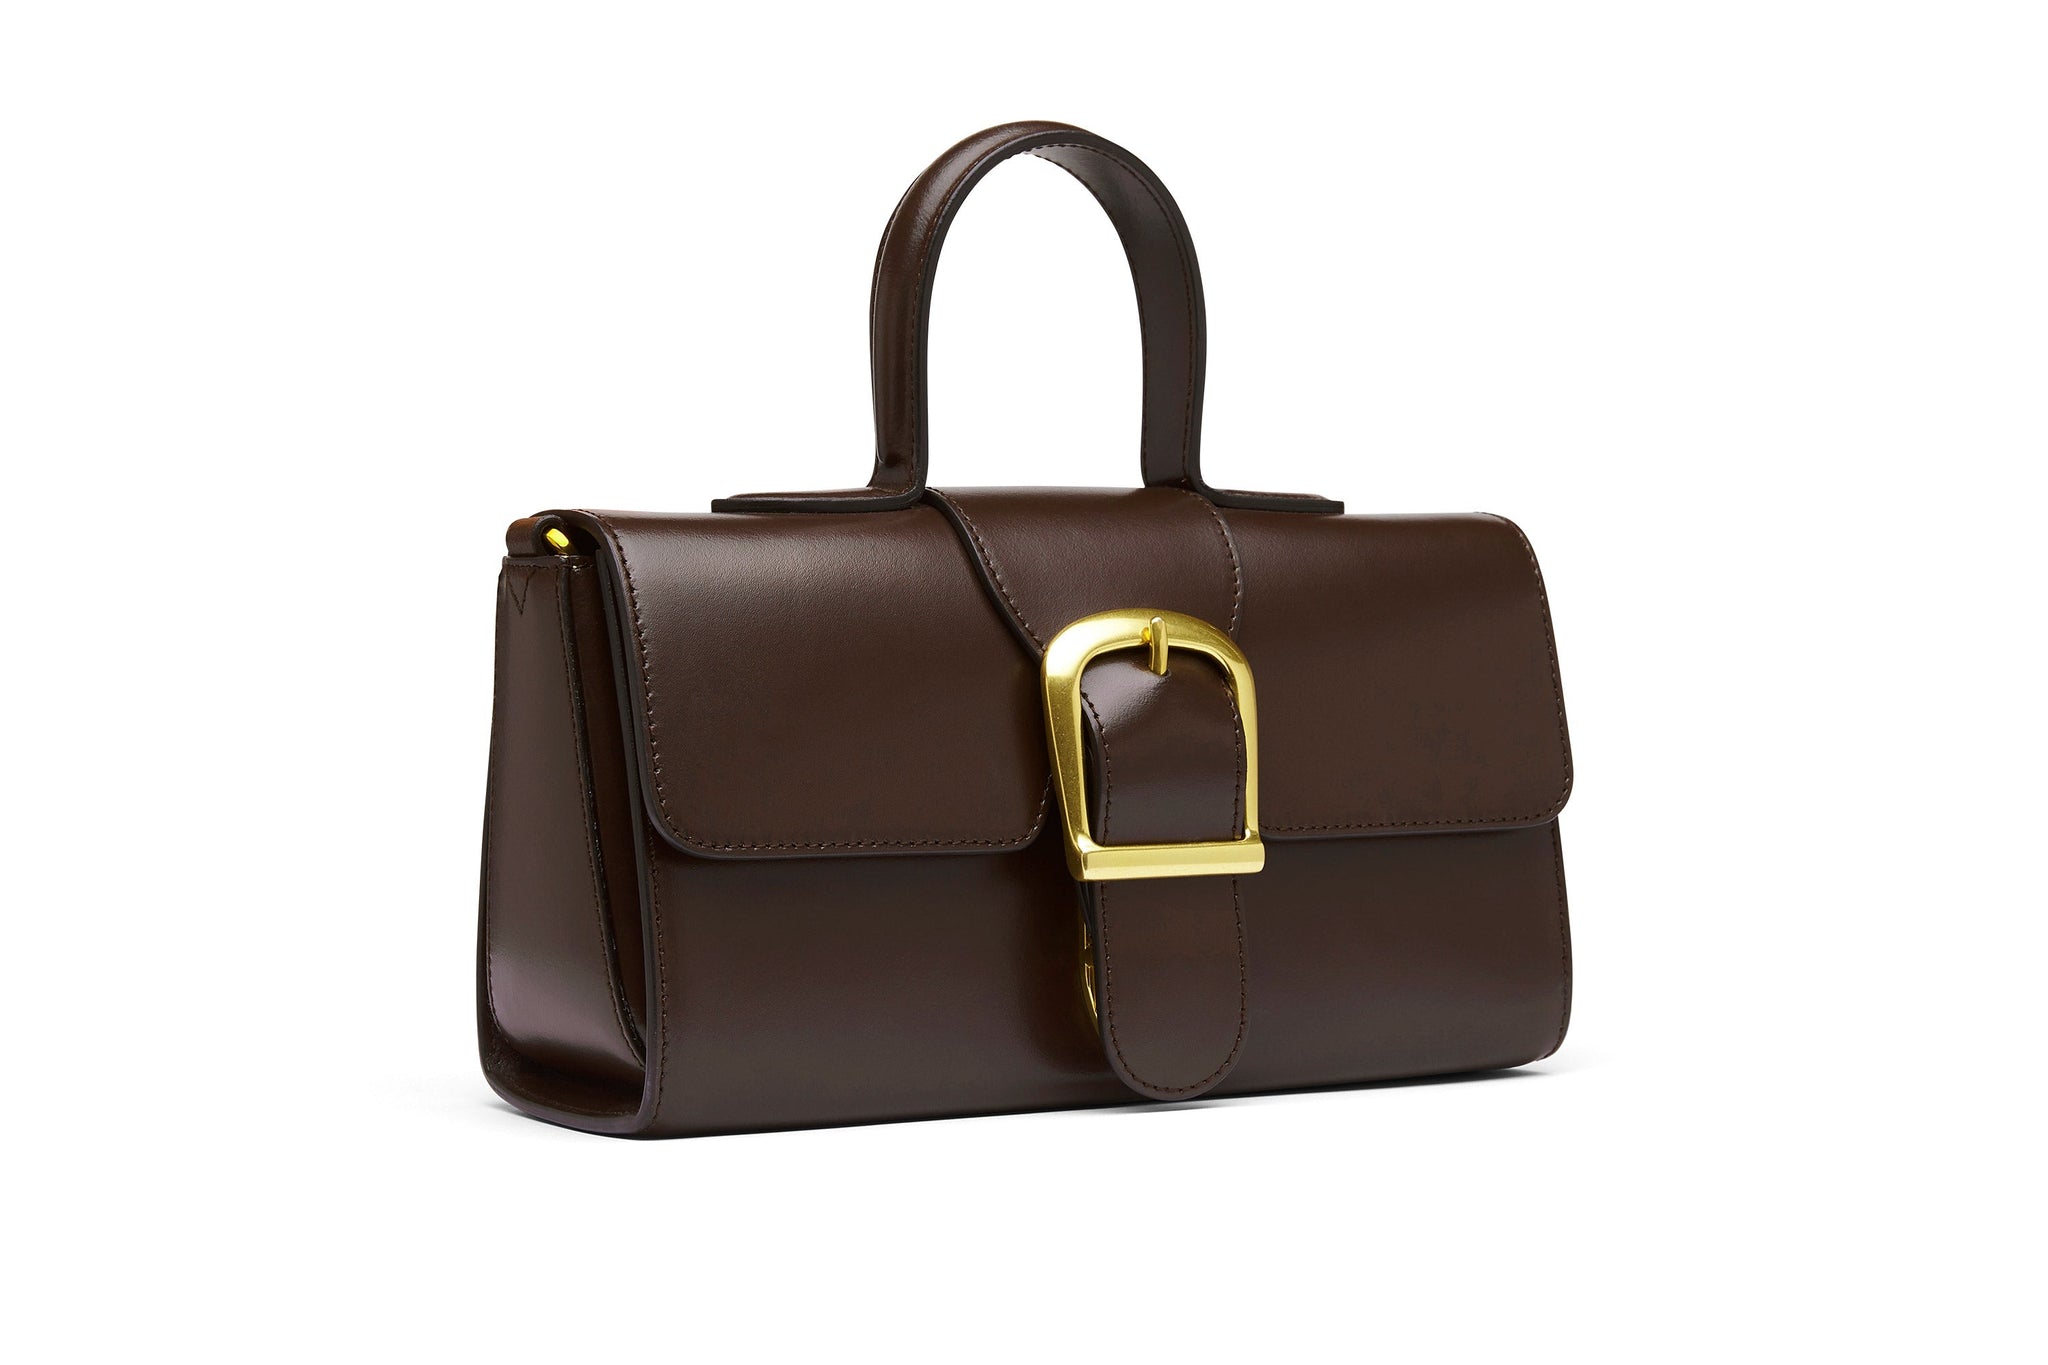 Rylan, Rylan Studio, 5.42 Cacao Small Satchel, Made in Italy